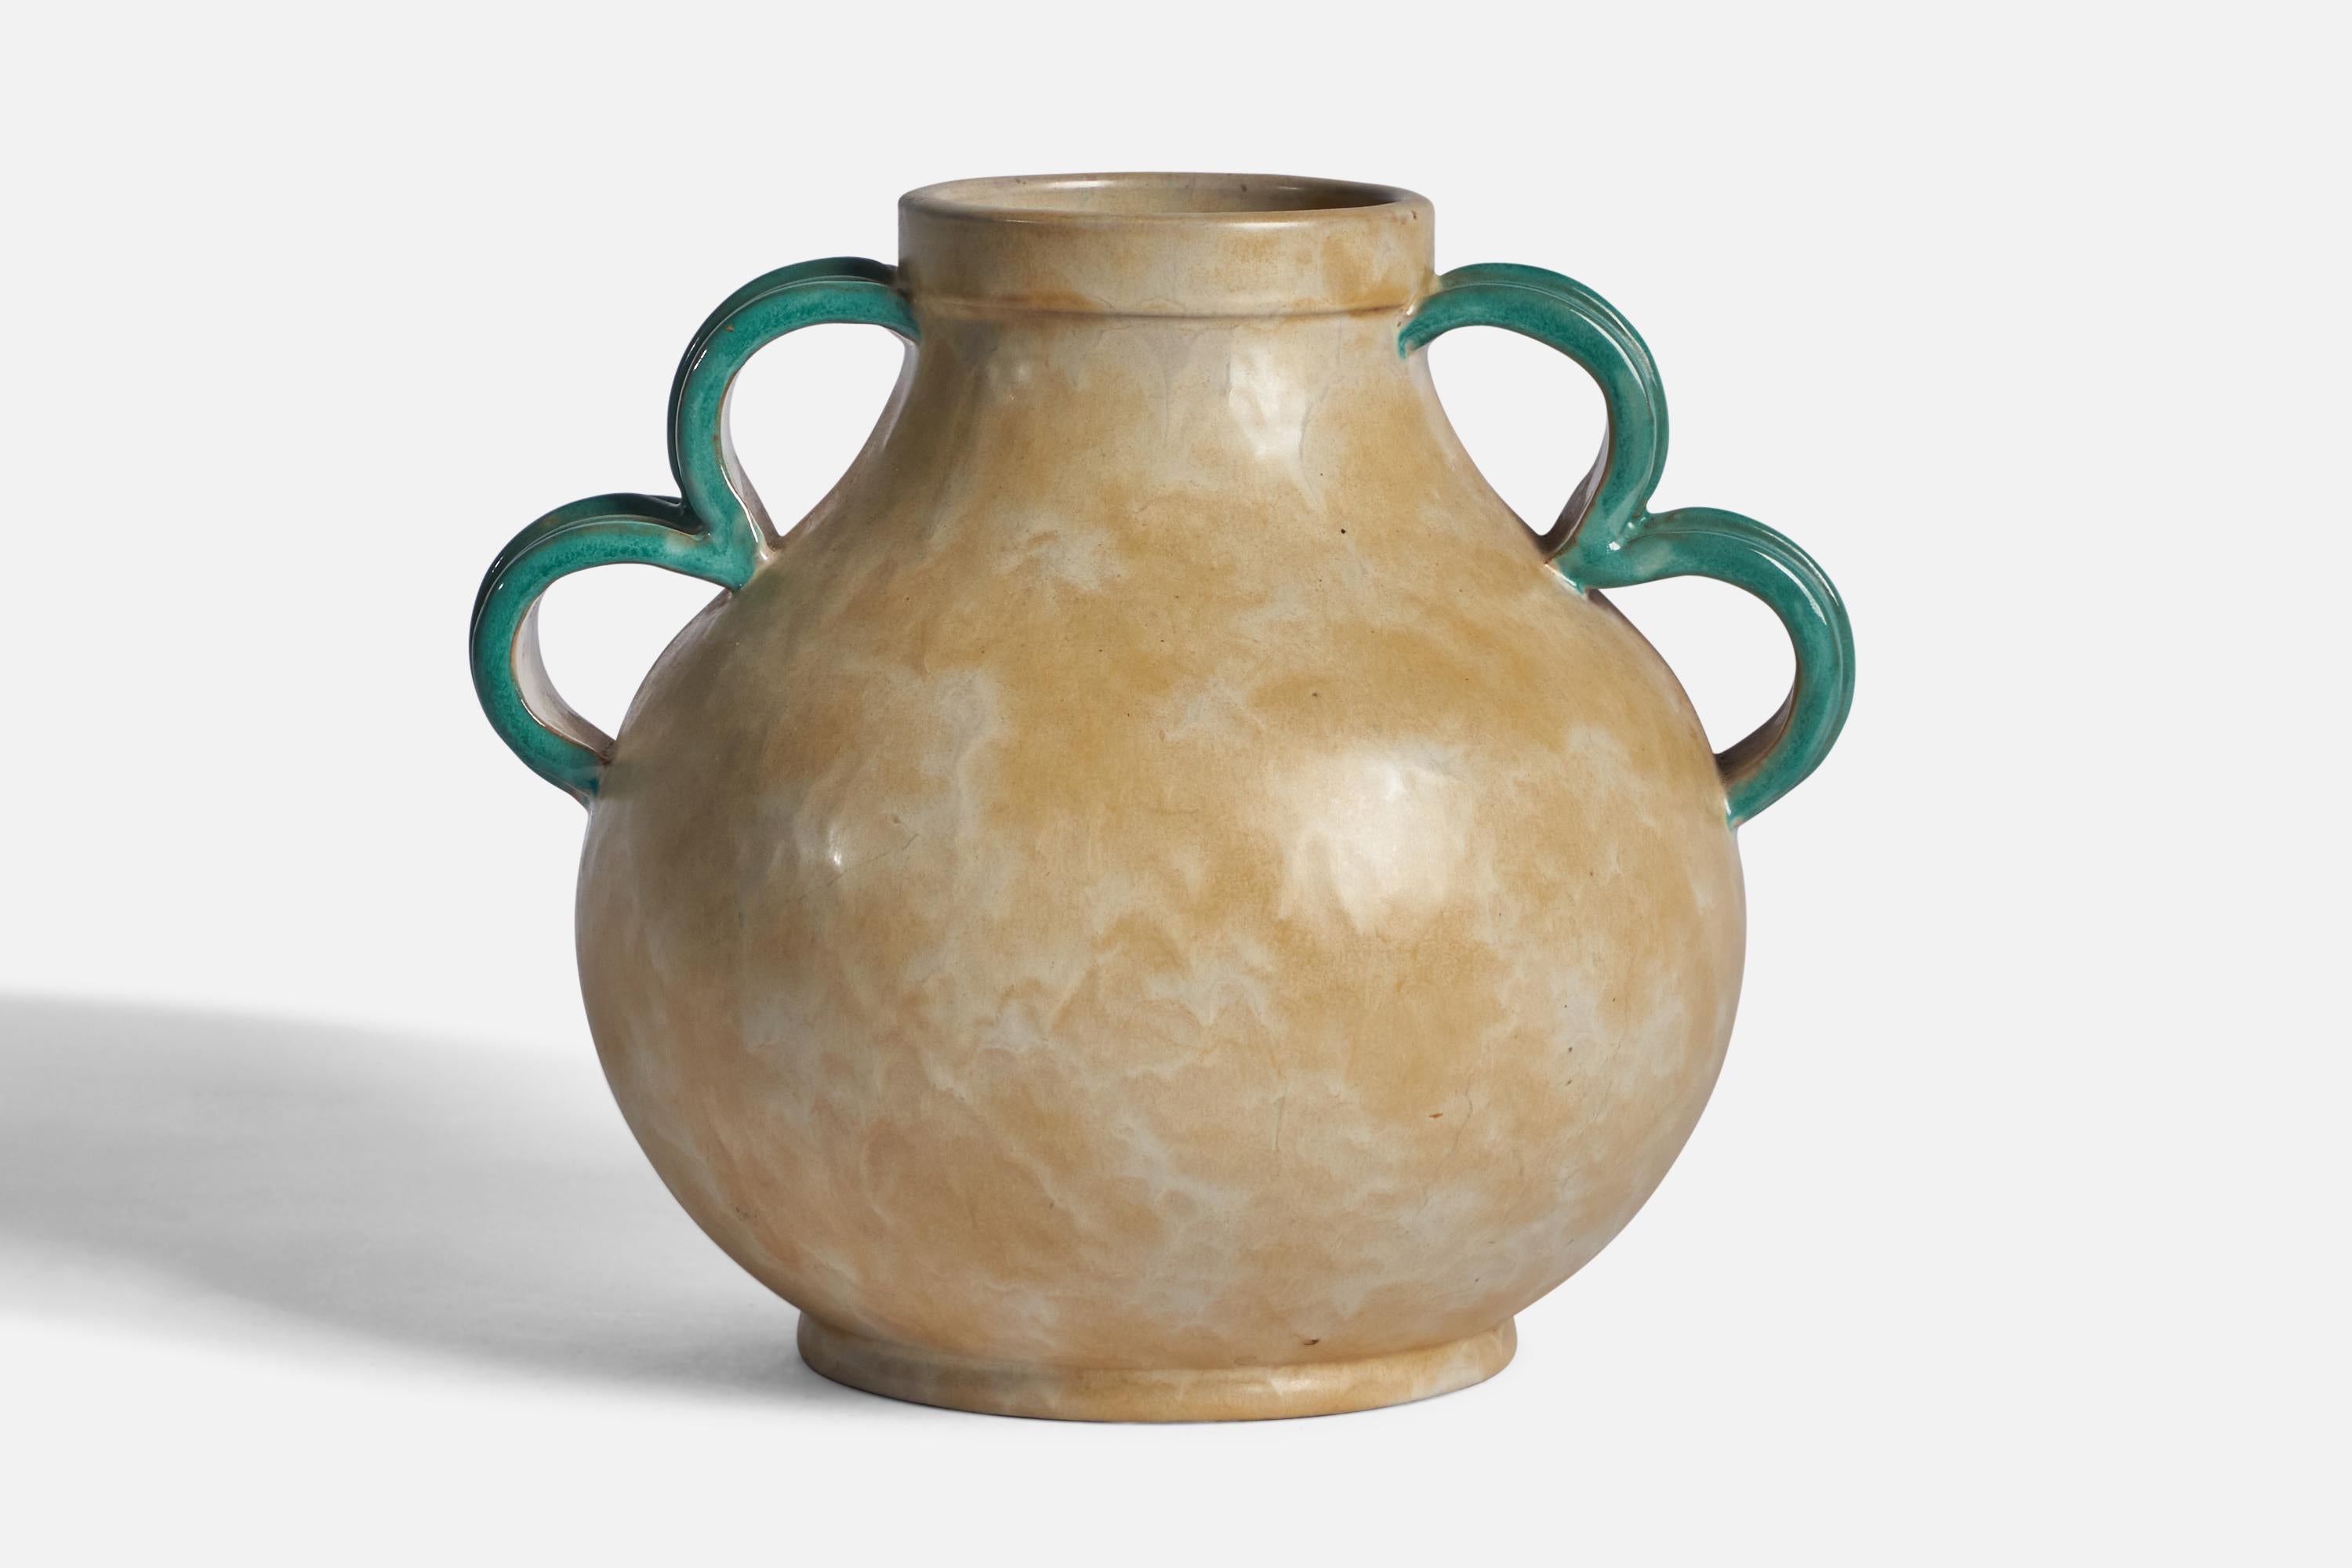 A sizeable green and beige-glazed earthenware vase designed and produced by Upsala Ekeby, Sweden, 1930s.